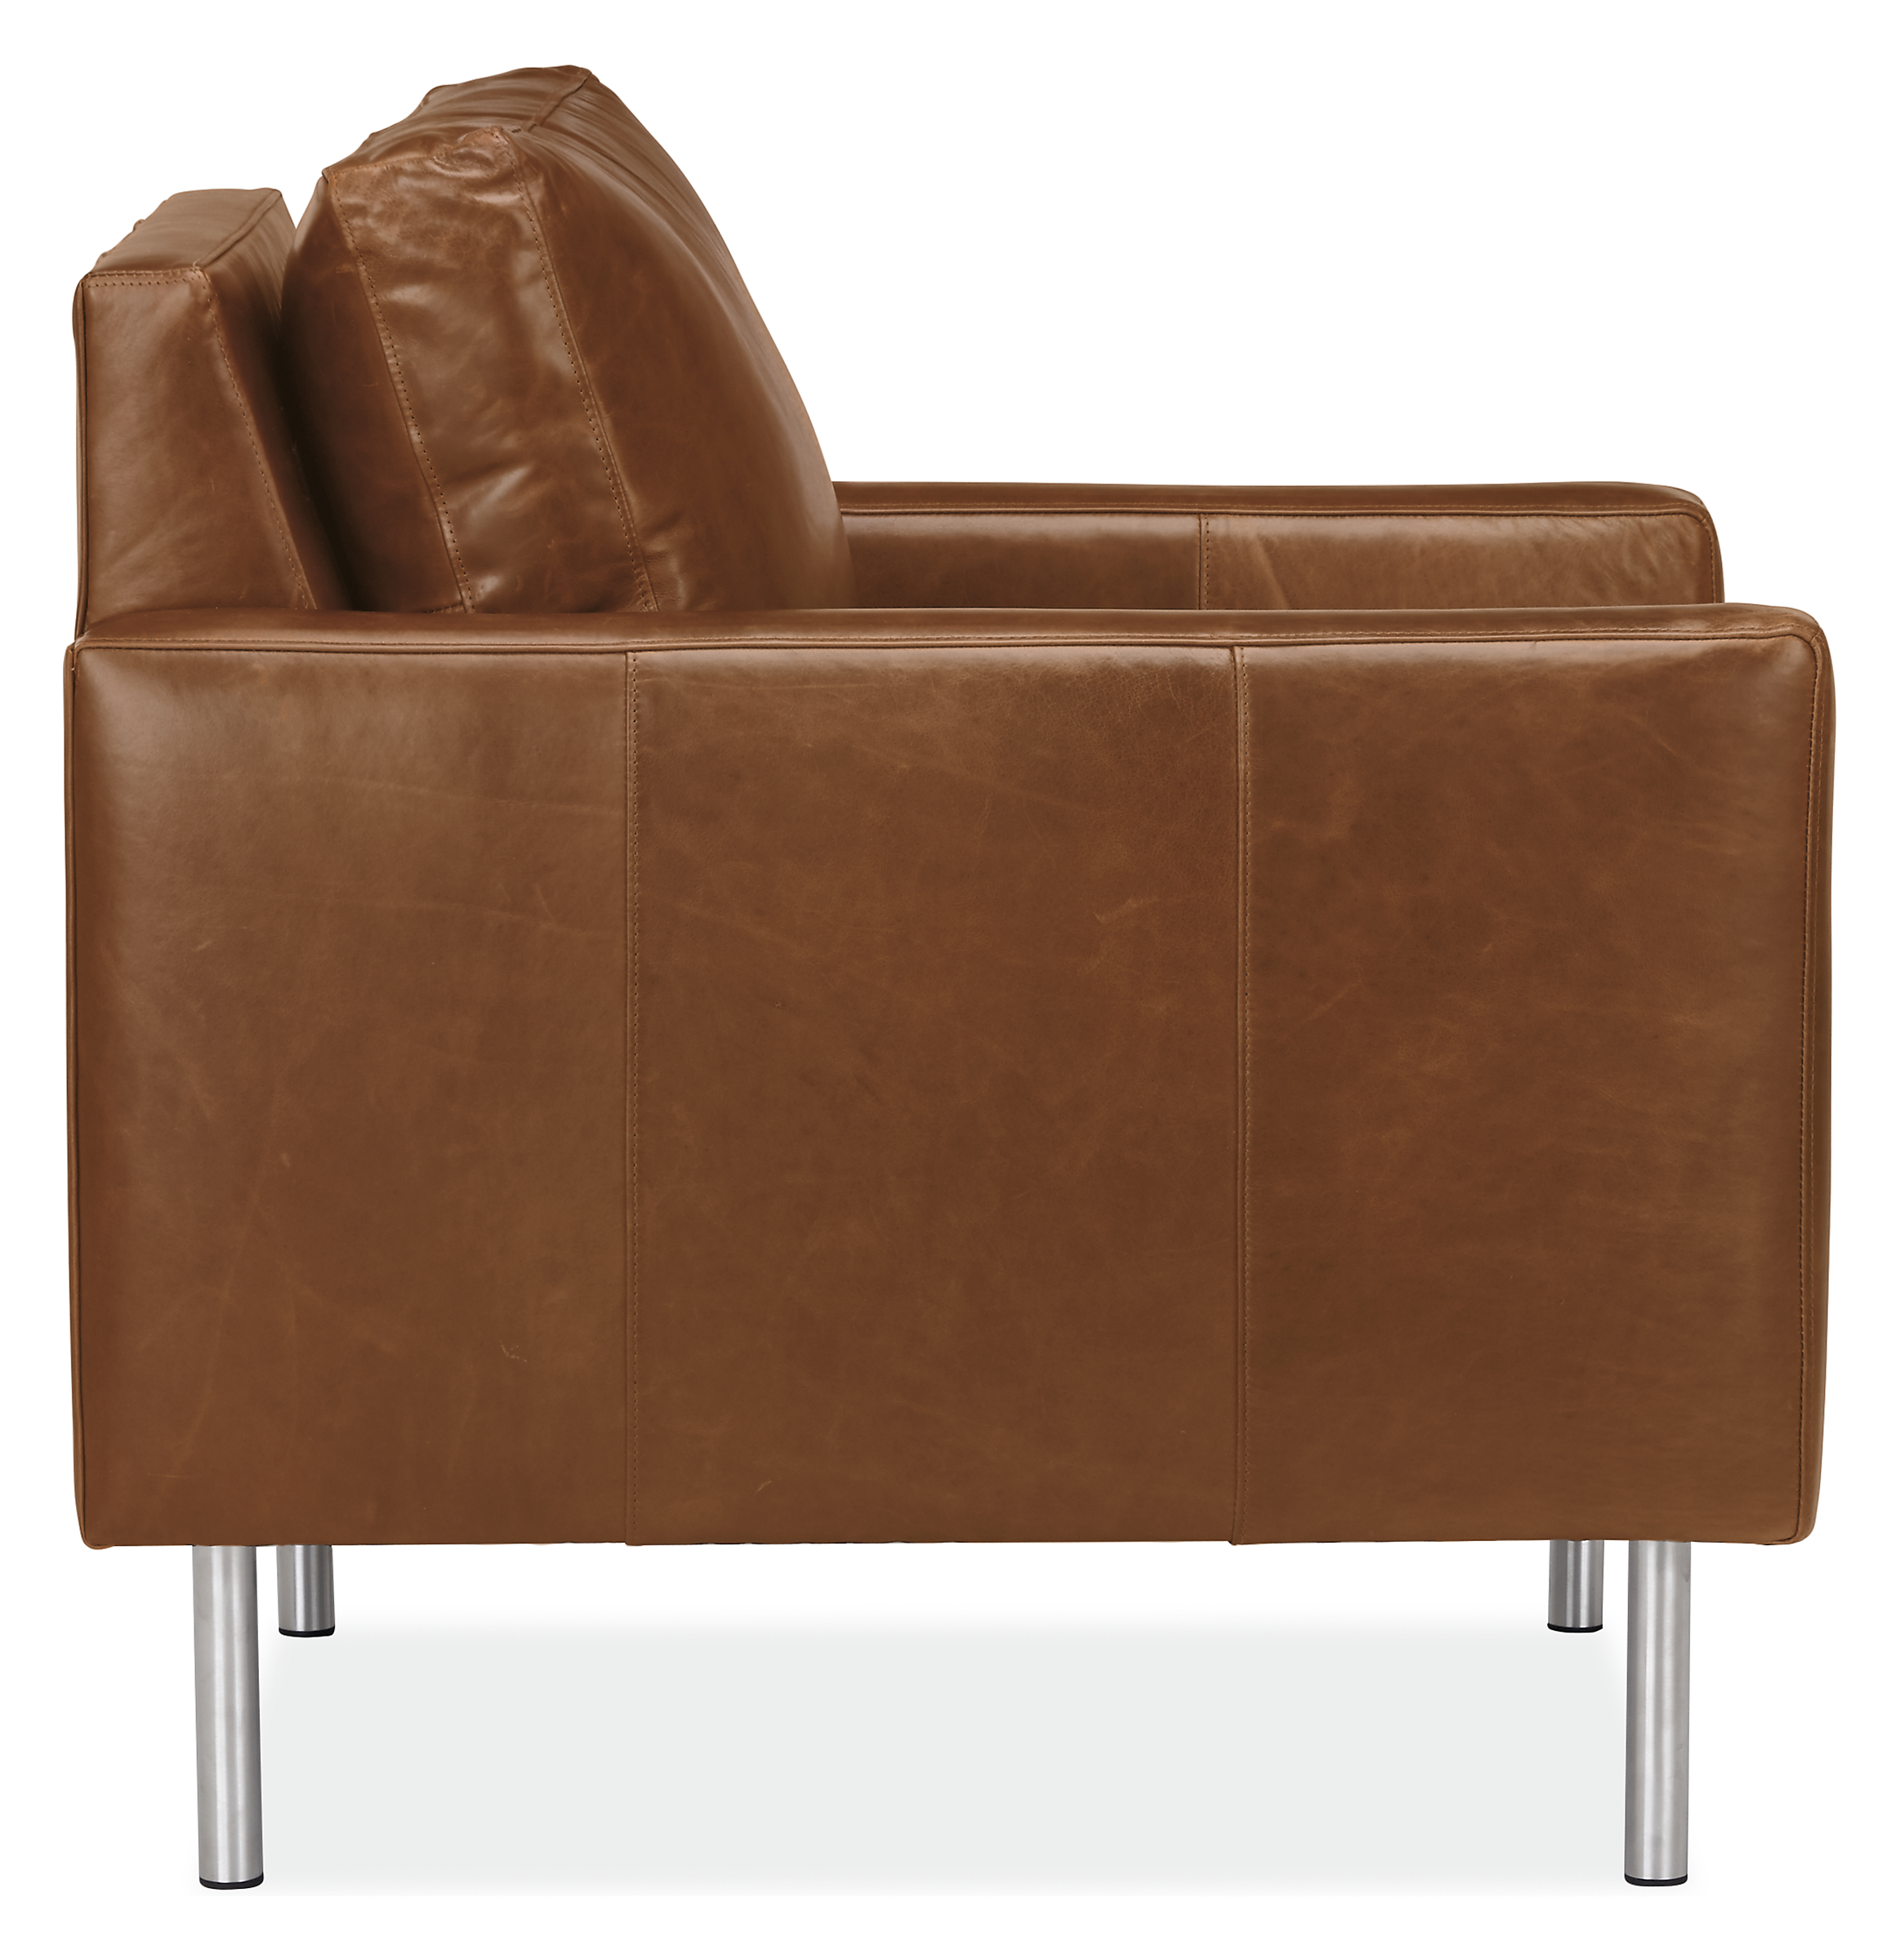 Side view of Jasper 30" Chair in Vento Leather with Metal Legs.